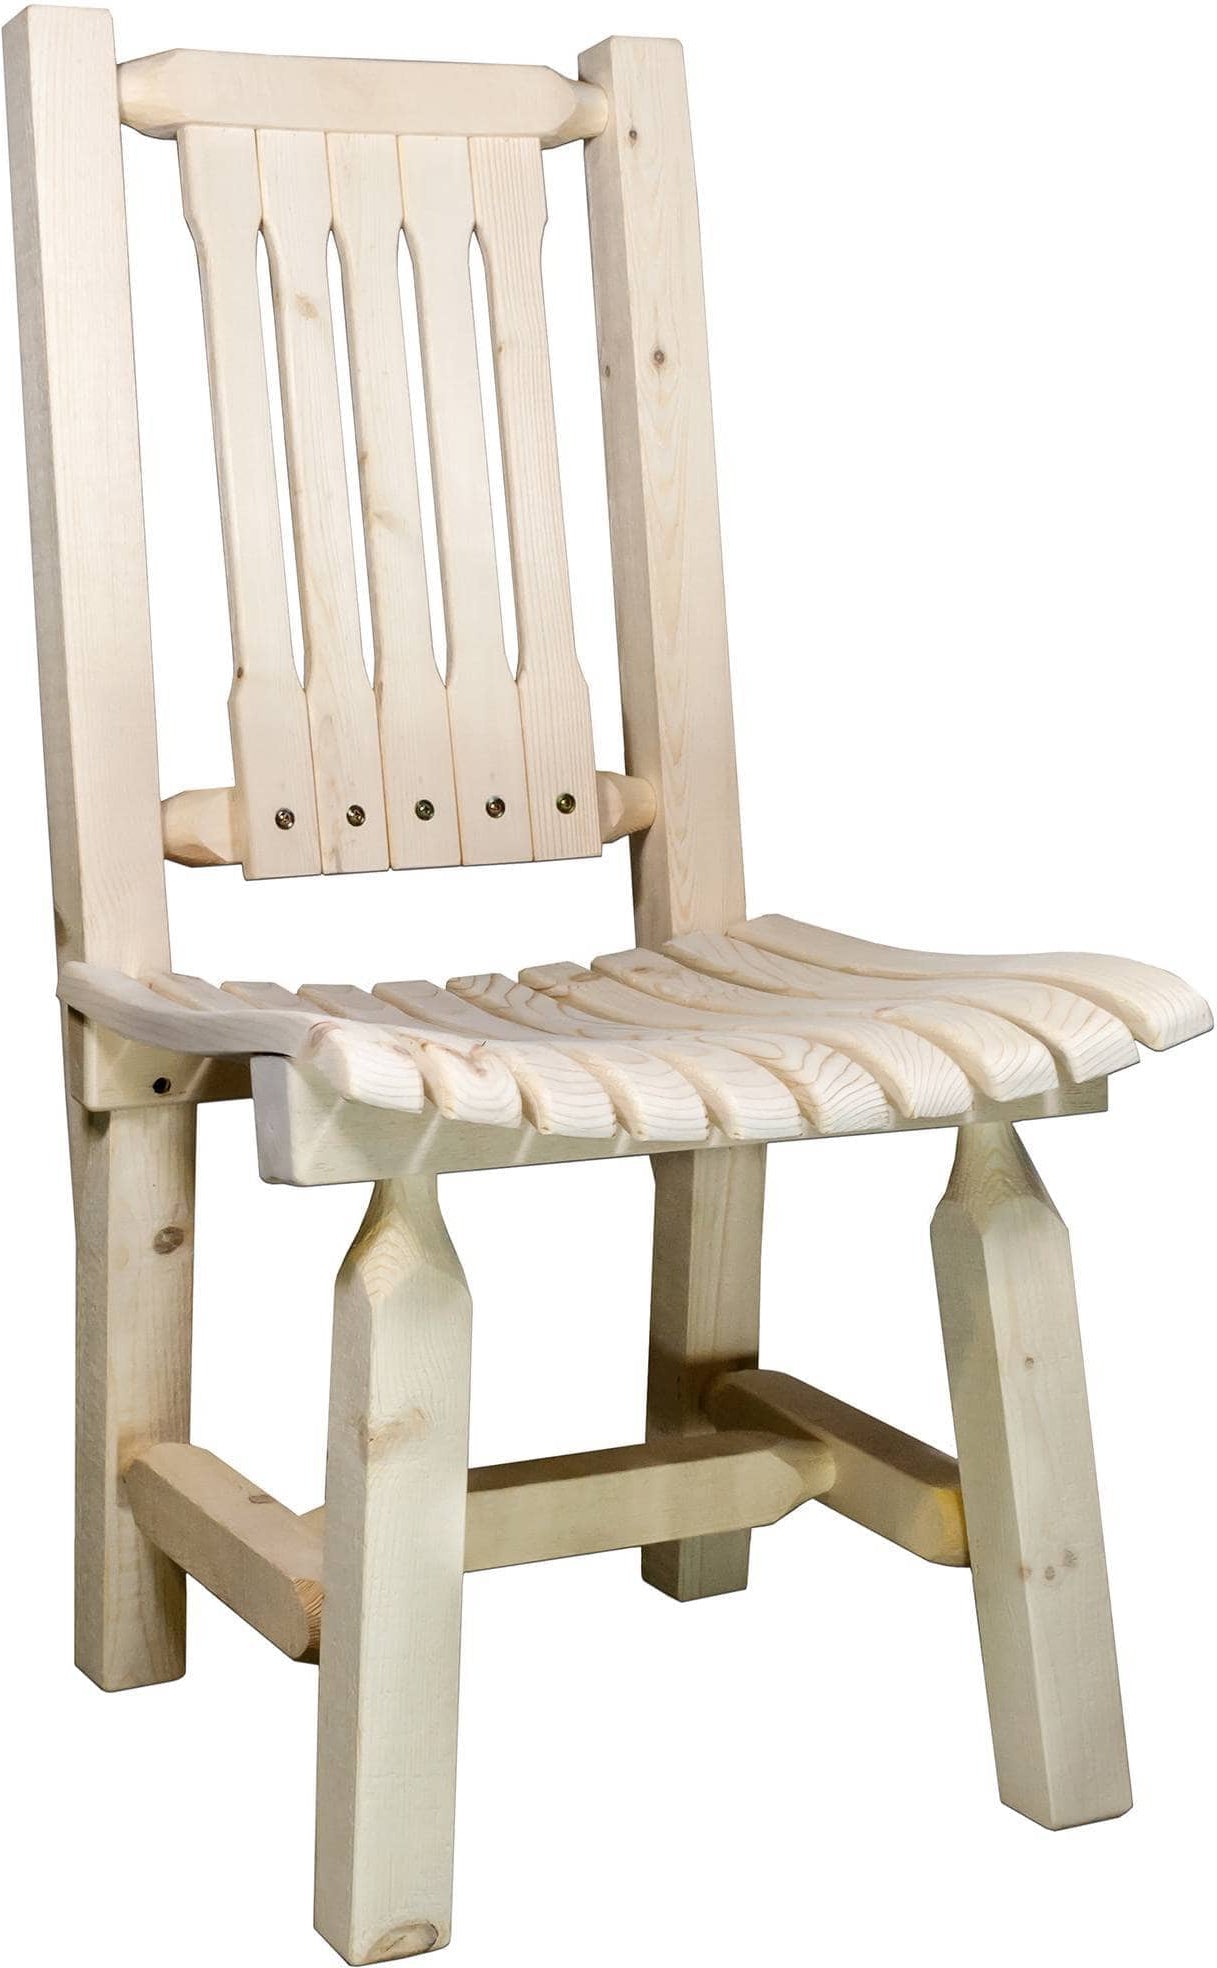 Montana Woodworks Homestead Collection Patio Chair-Rustic Furniture Marketplace